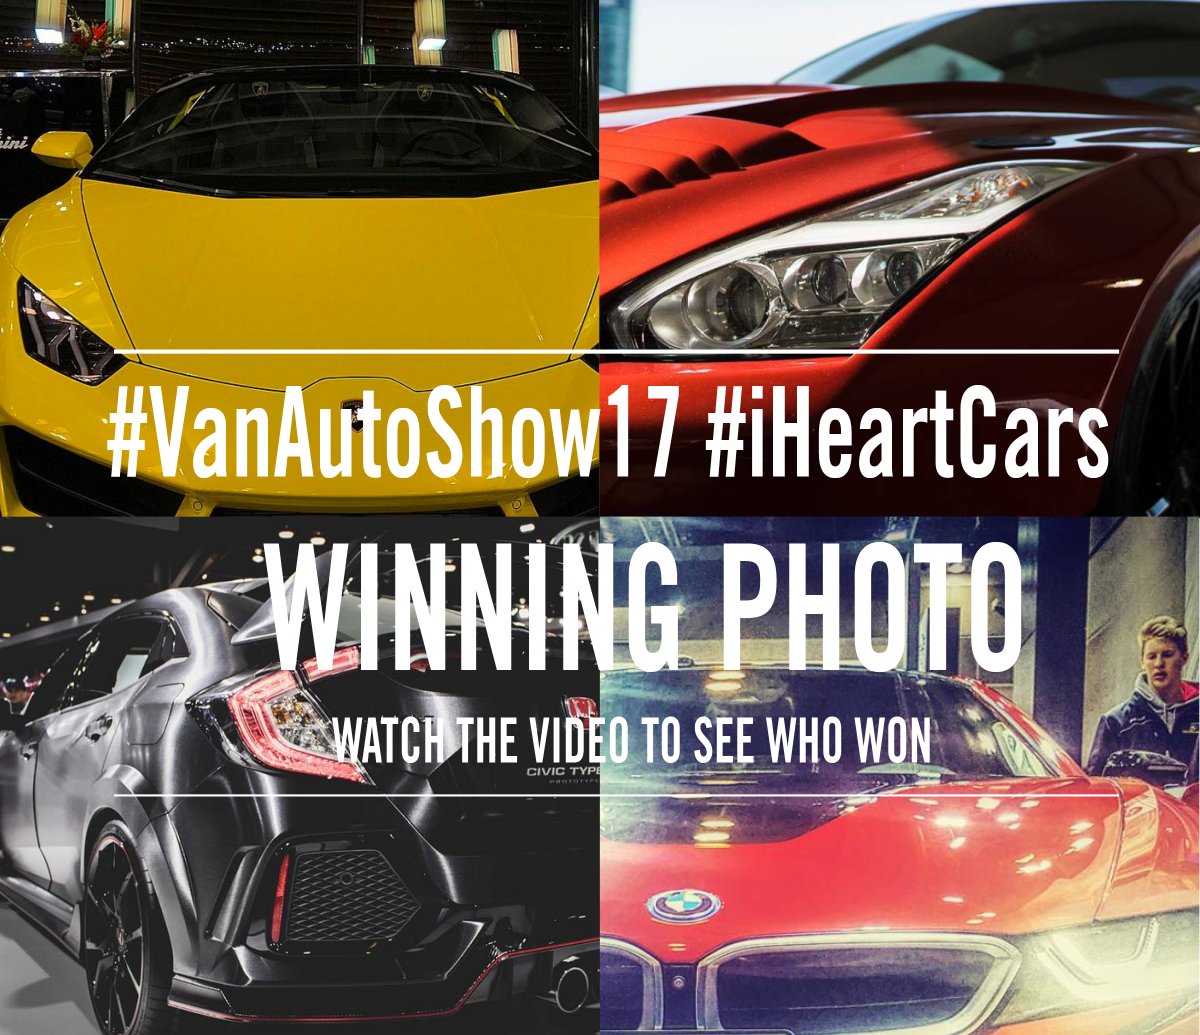 Where can you find free tickets to an auto show?